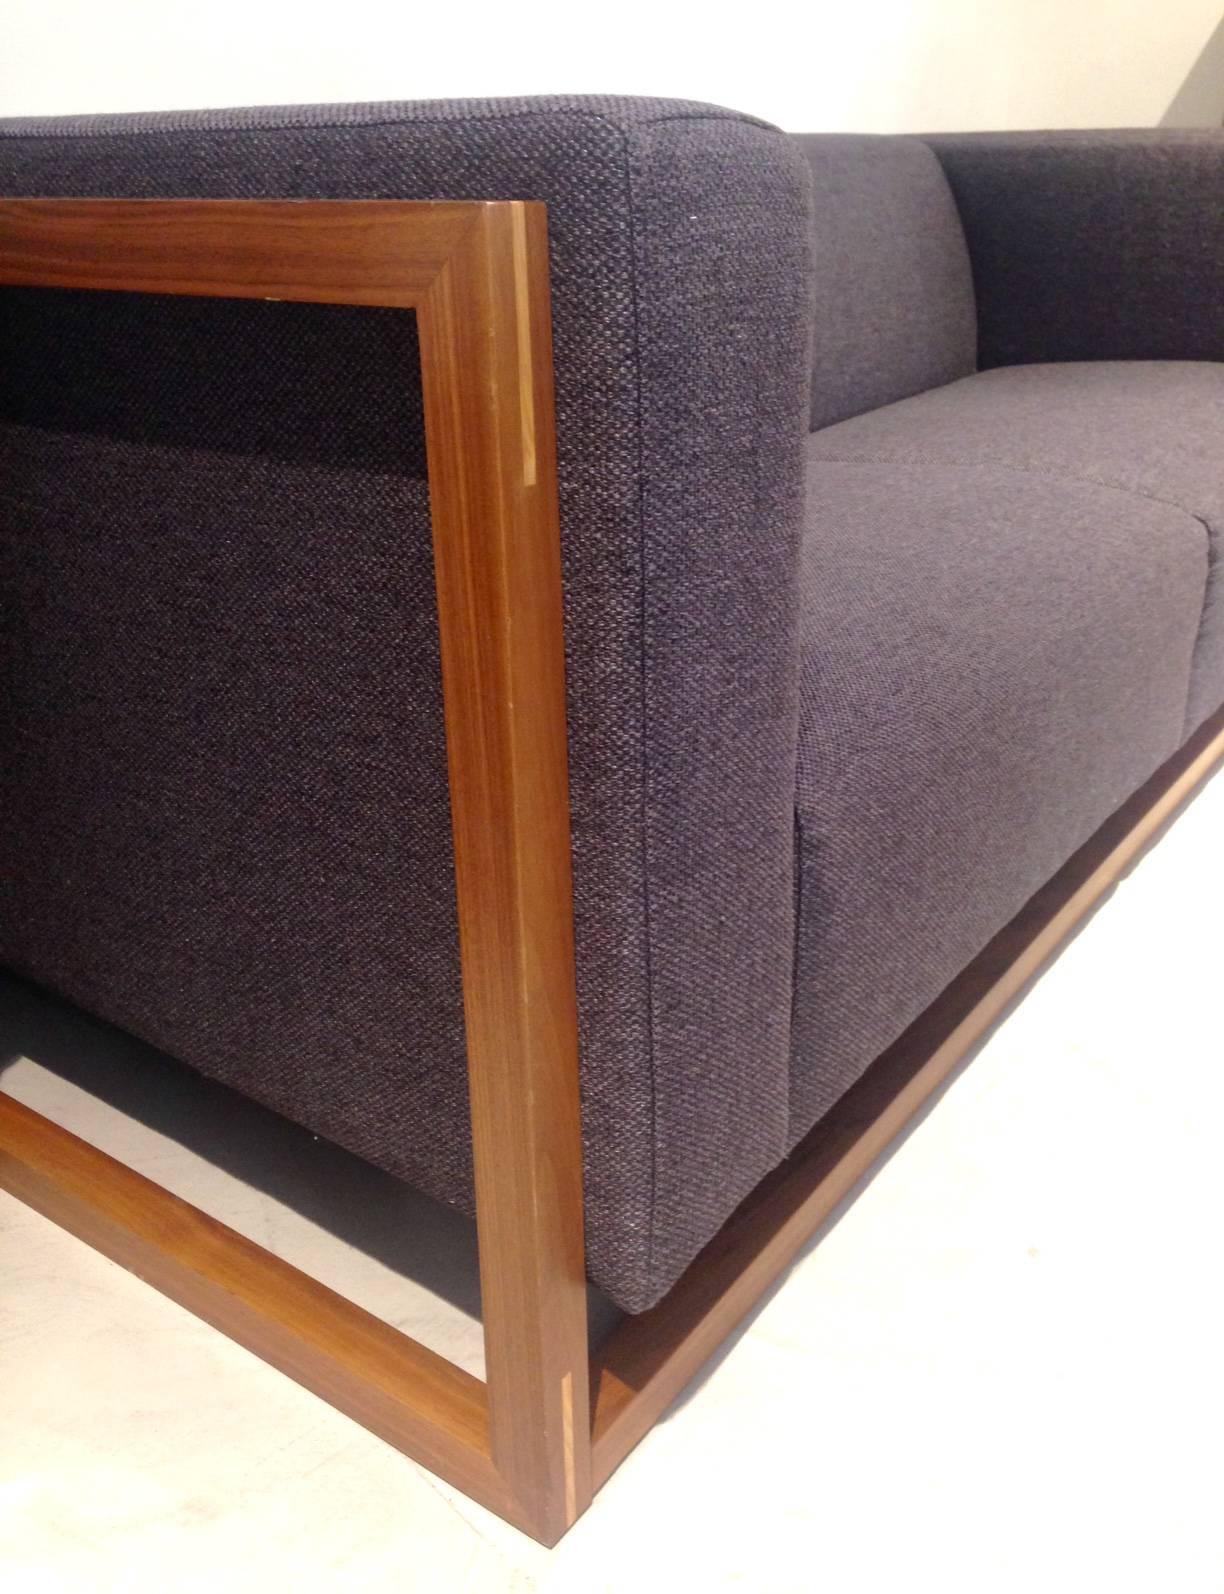 Modern Three-Seat Sofa with Solid Walnut Frame and Grey Upholstery 1